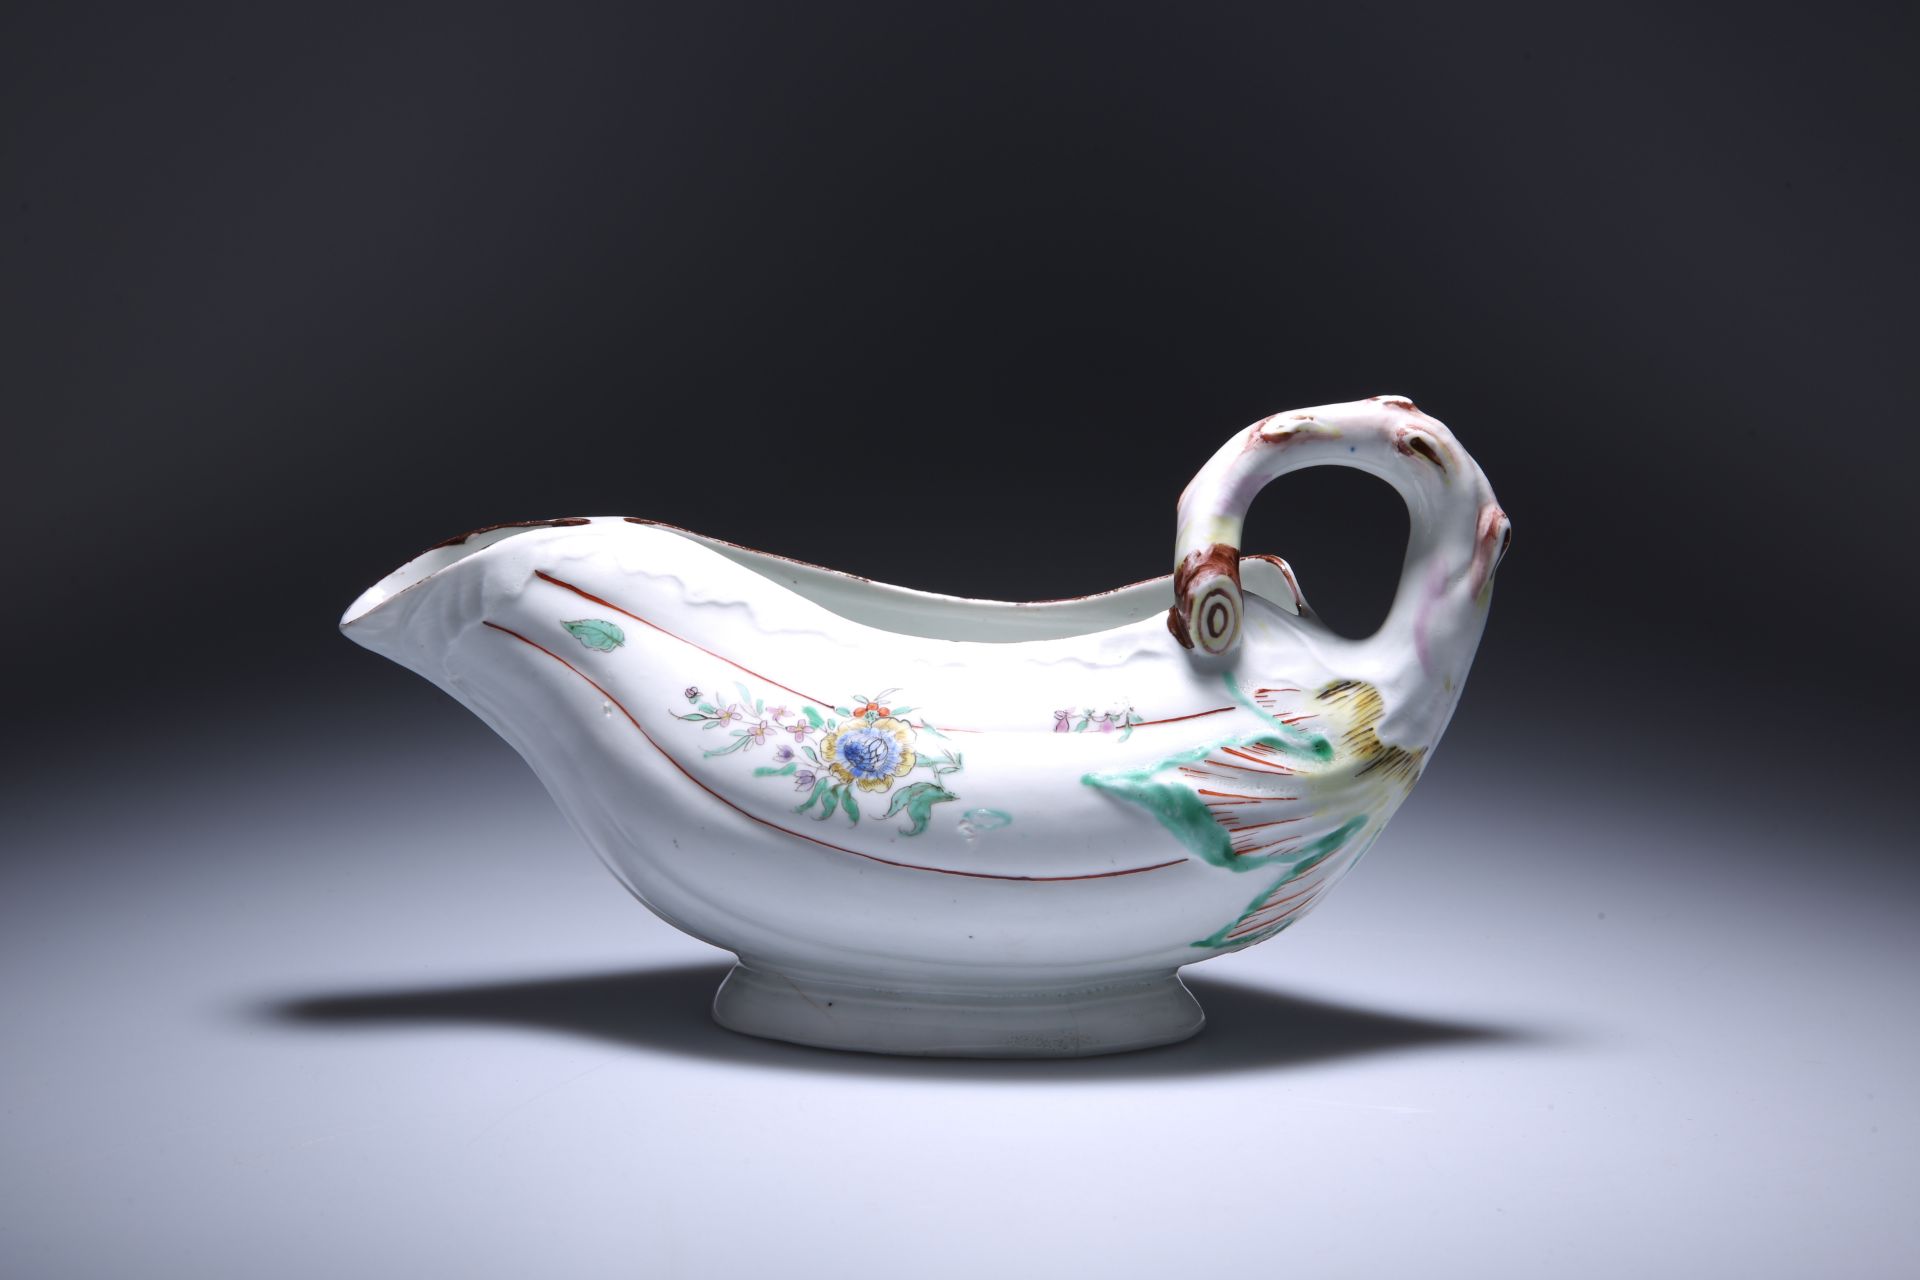 A RARE WORCESTER PORCELAIN POLYCHROME LEAF SAUCE BOAT WITH CONJOINED LIP, c. 1760